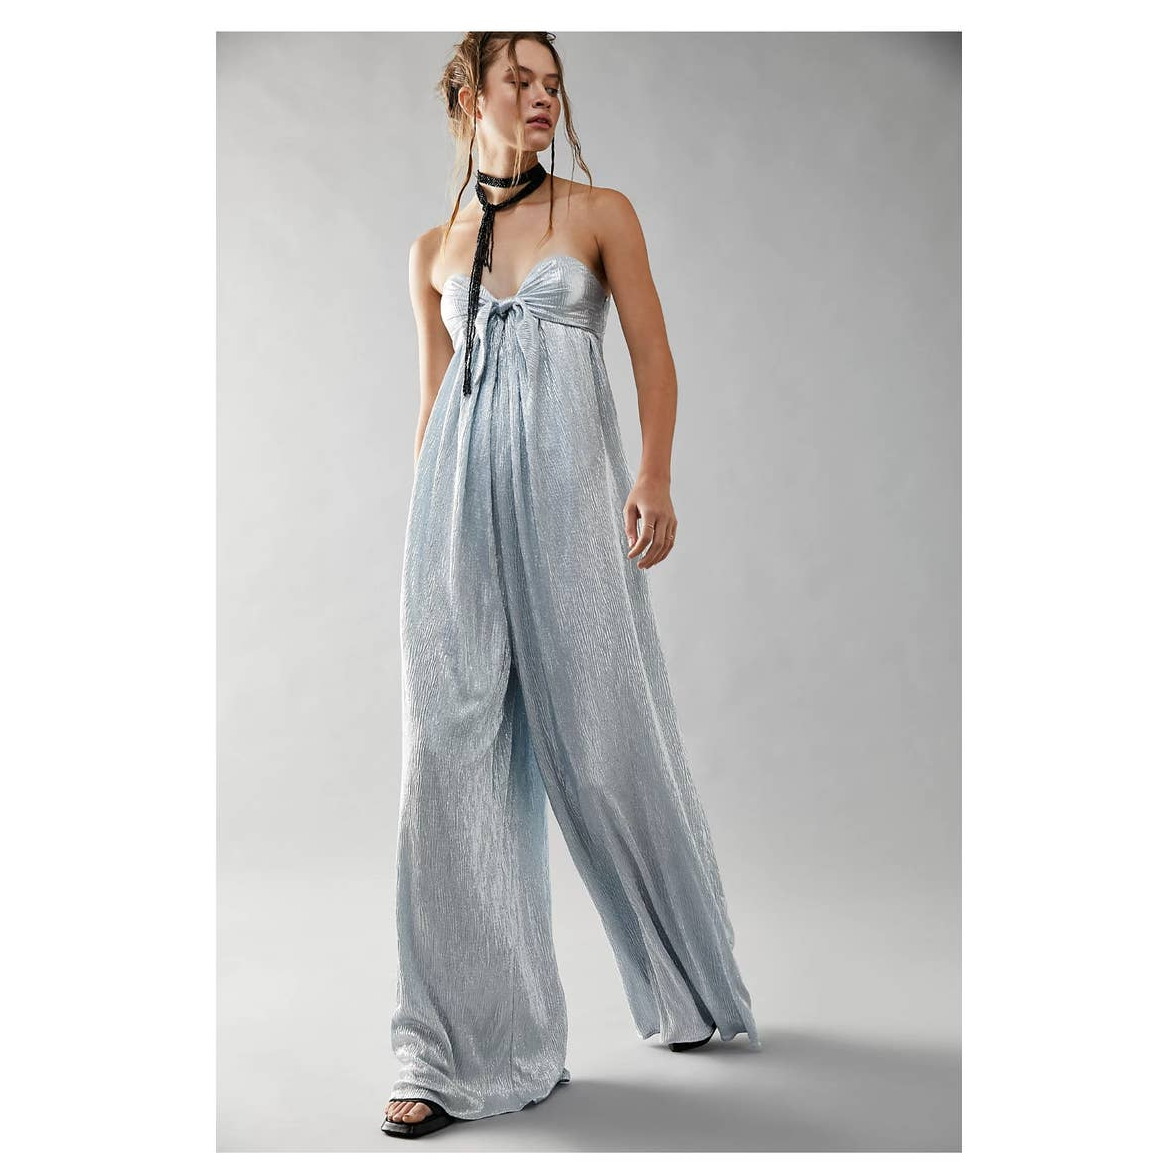 Primary image for New Free People Olivia Strapless Jumpsuit  $300 SMALL Blue METALLIC  